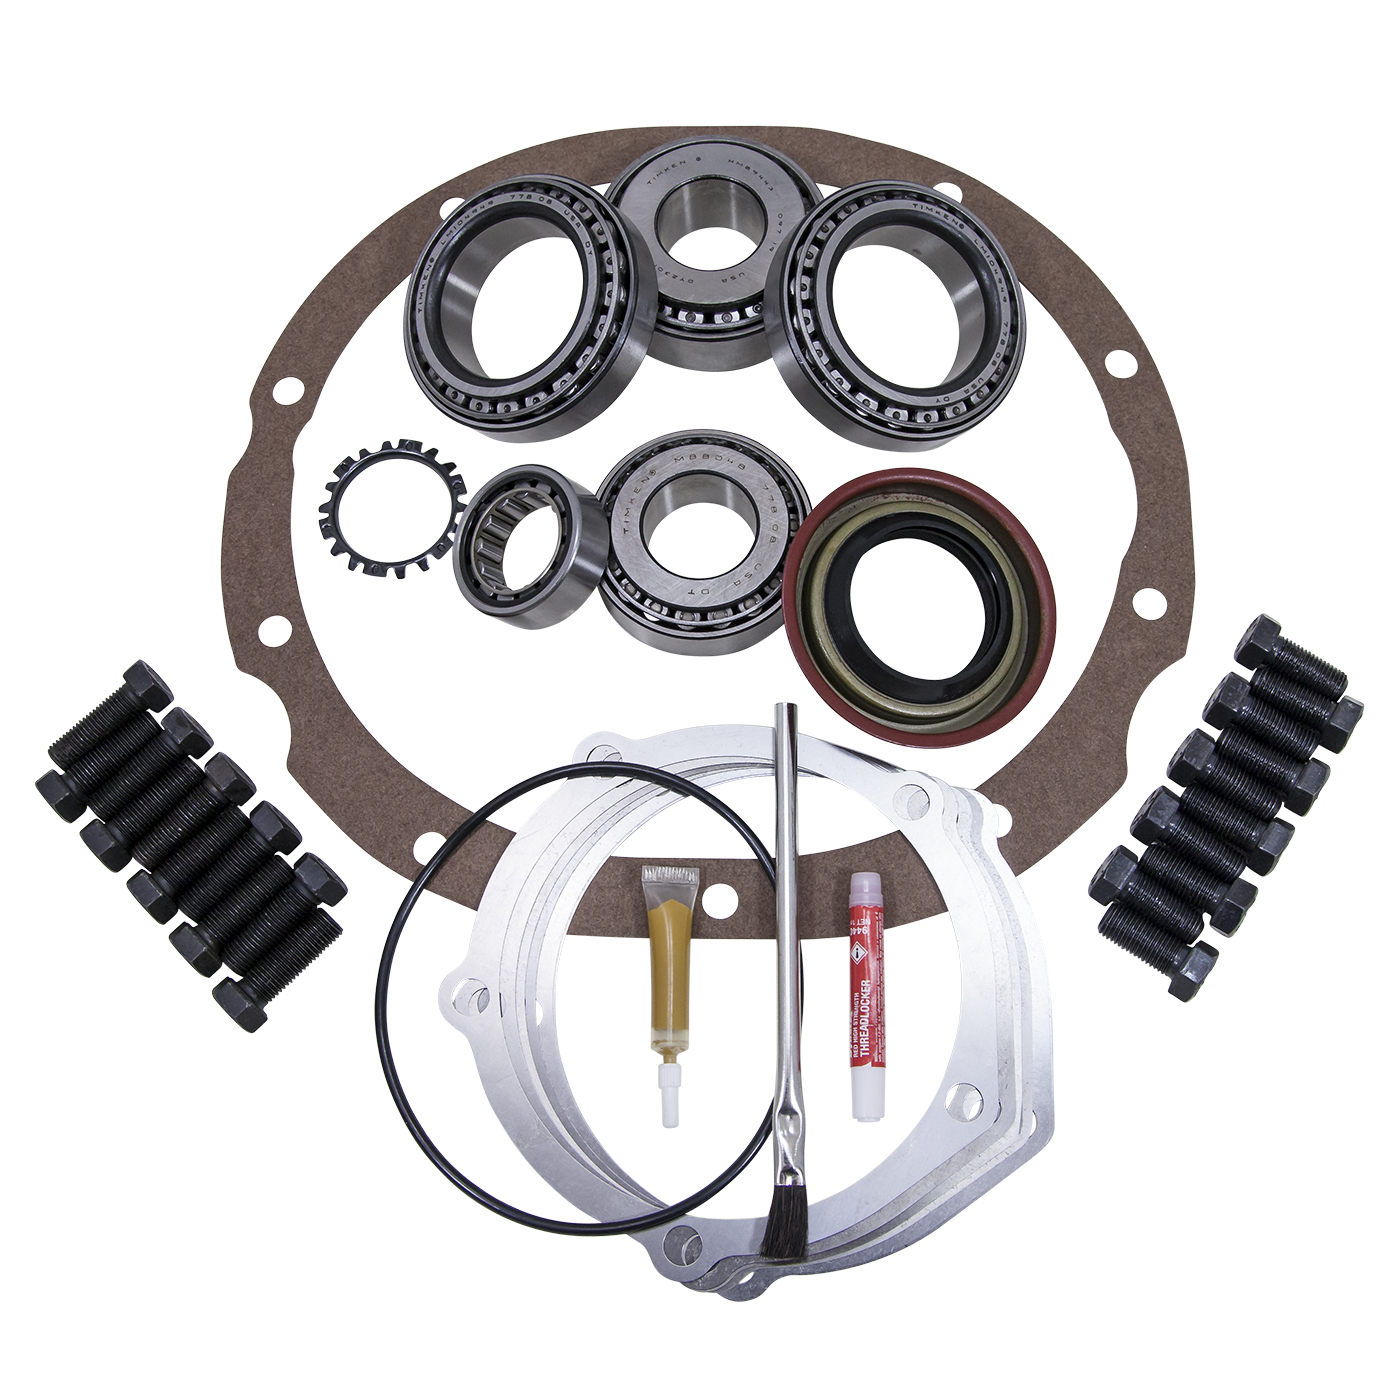 USA Standard Master Overhaul kit, Ford 9" LM603011 differential w/ solid spacer